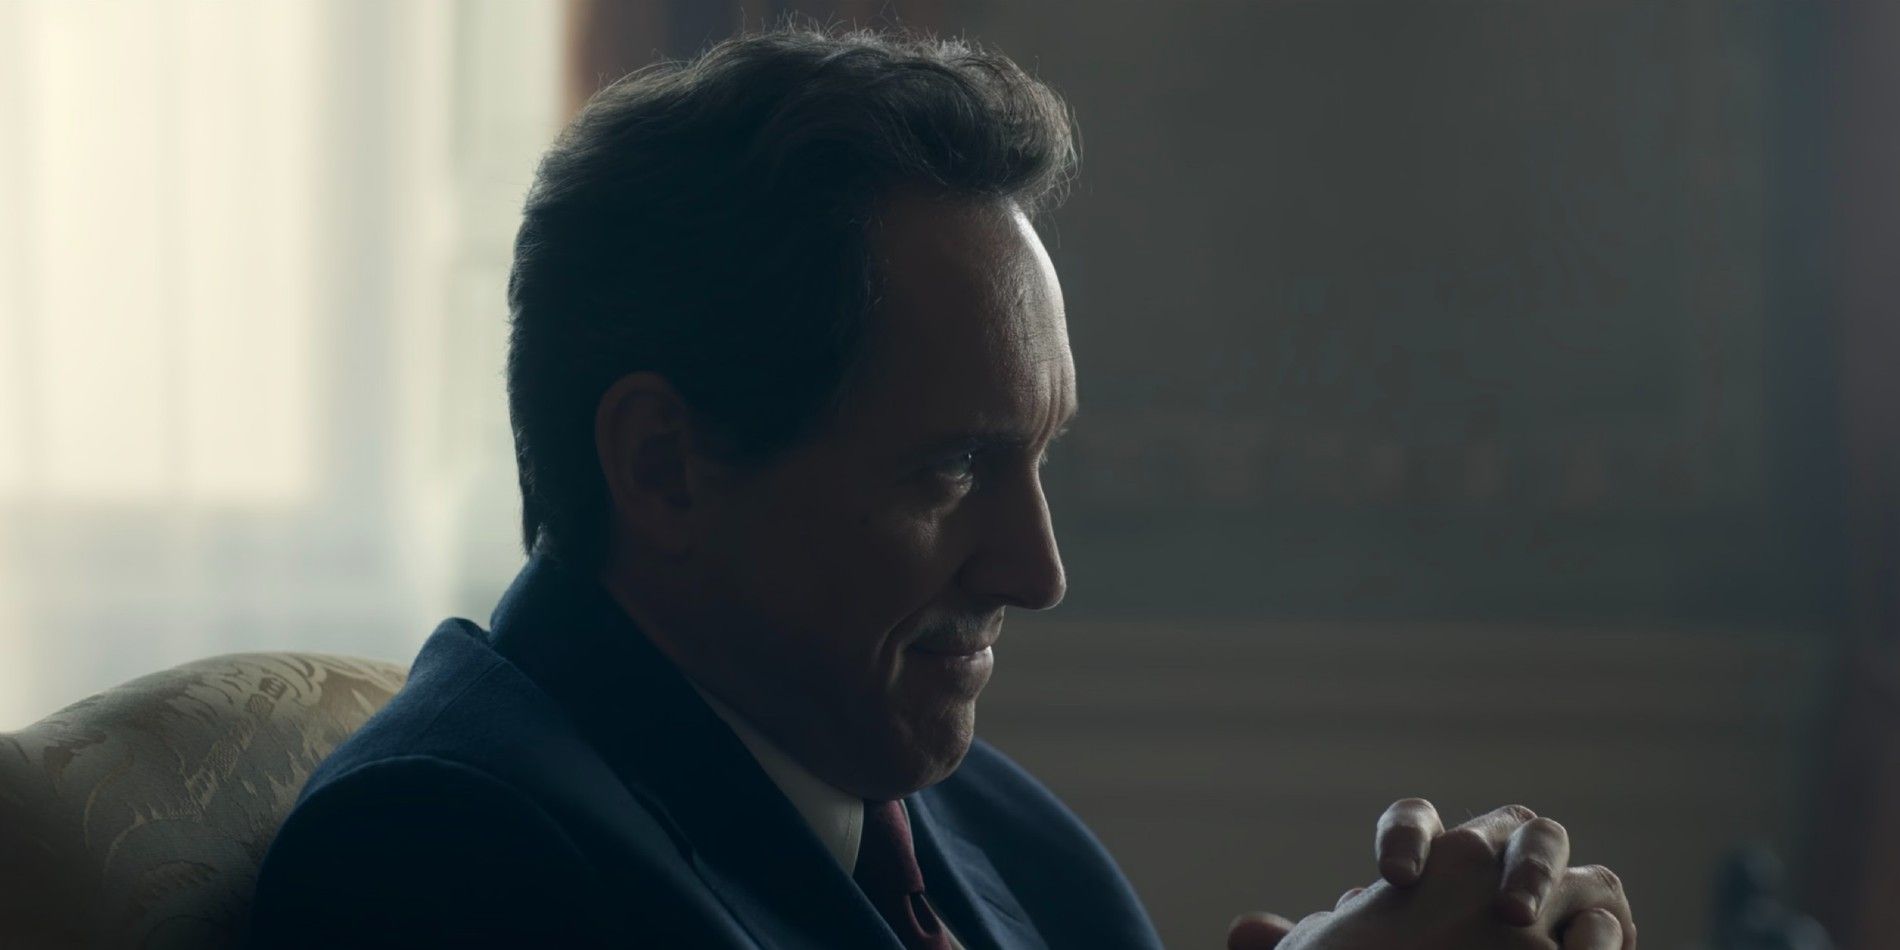 Tony Balir (Bertie Carvel) sits with his hands clasped in The Crown season 6